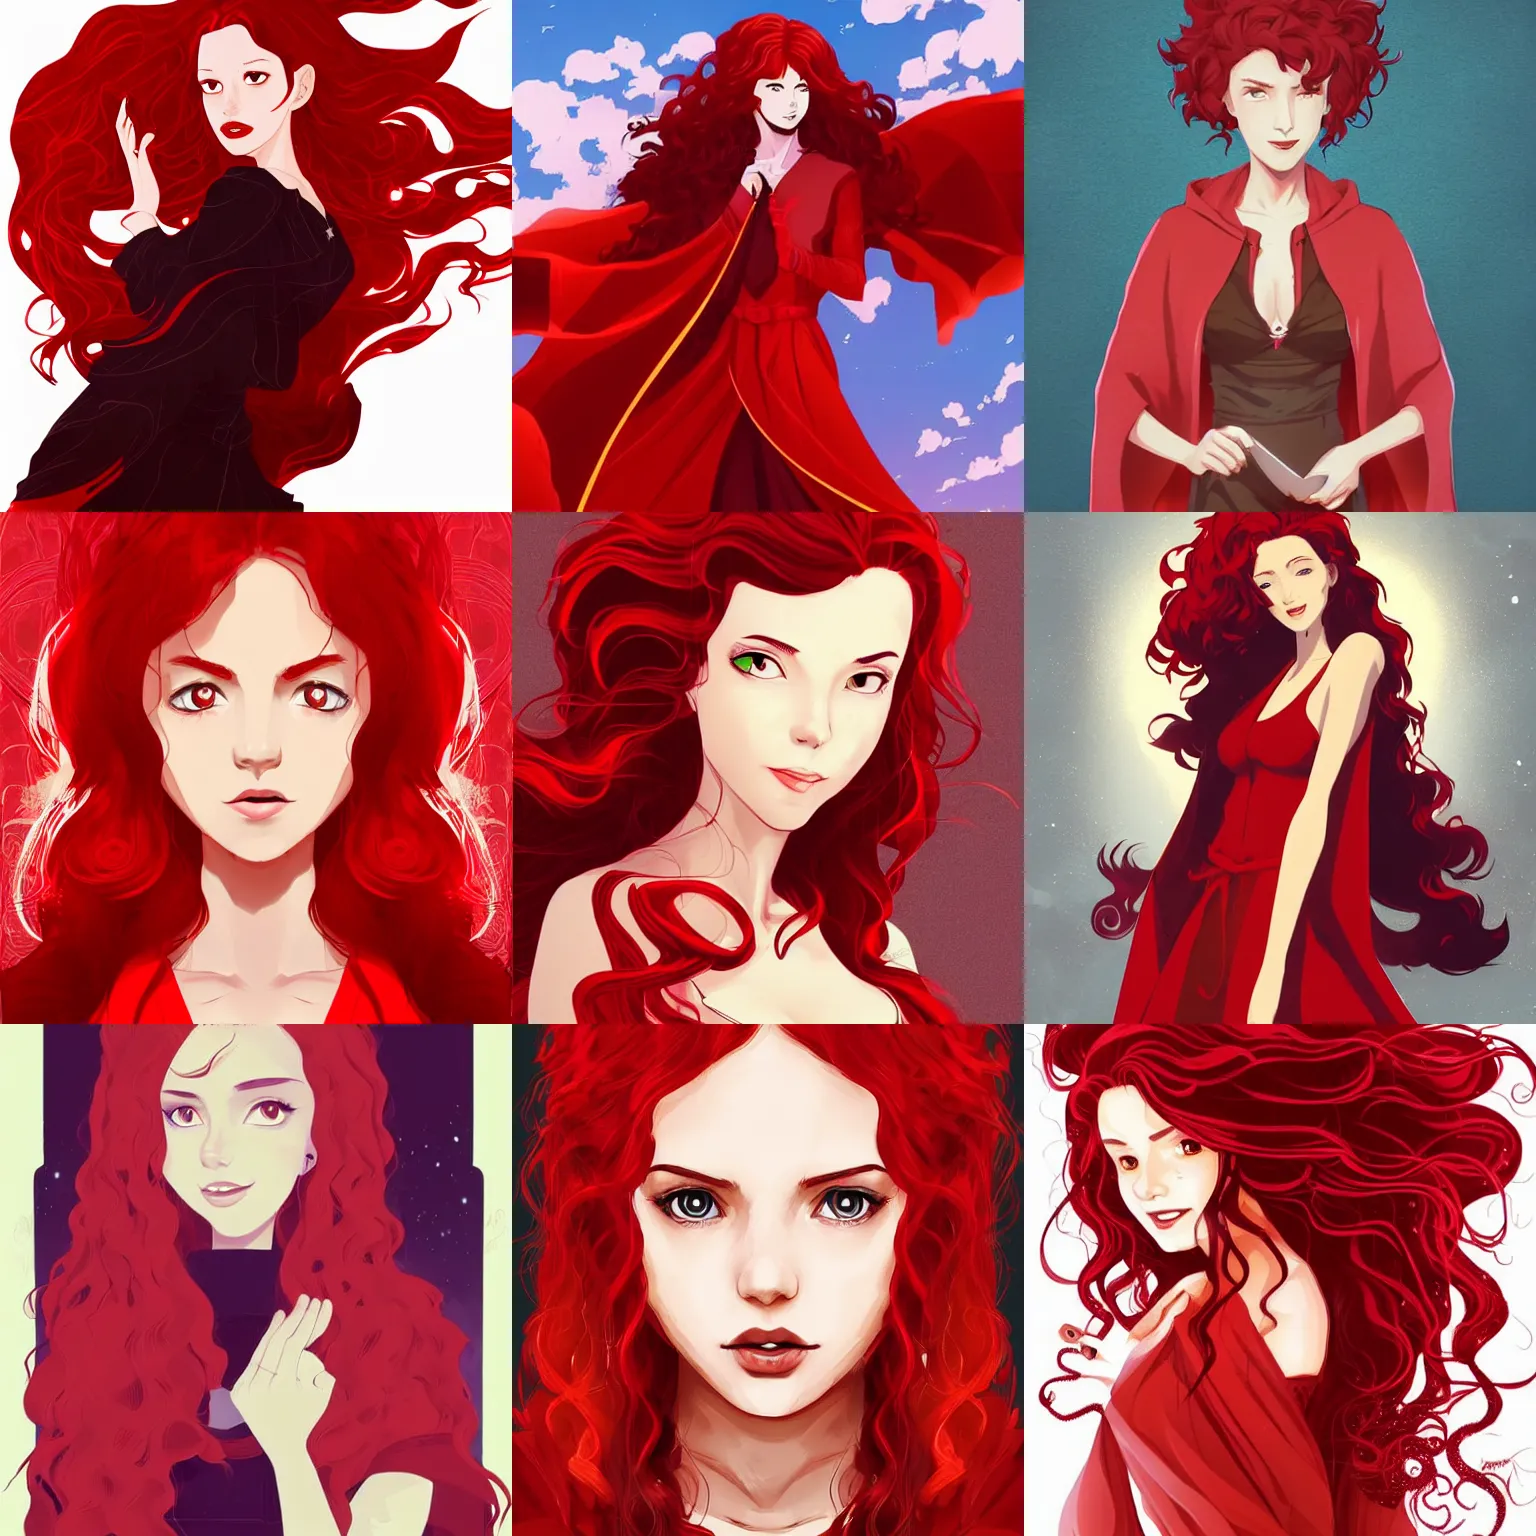 Prompt: portrait of a female sorceress with curly red hair wearing a red dress and a red cloak, clean cel shaded vector art. shutterstock. behance hd by lois van baarle, artgerm, helen huang, by makoto shinkai and ilya kuvshinov, rossdraws, illustration